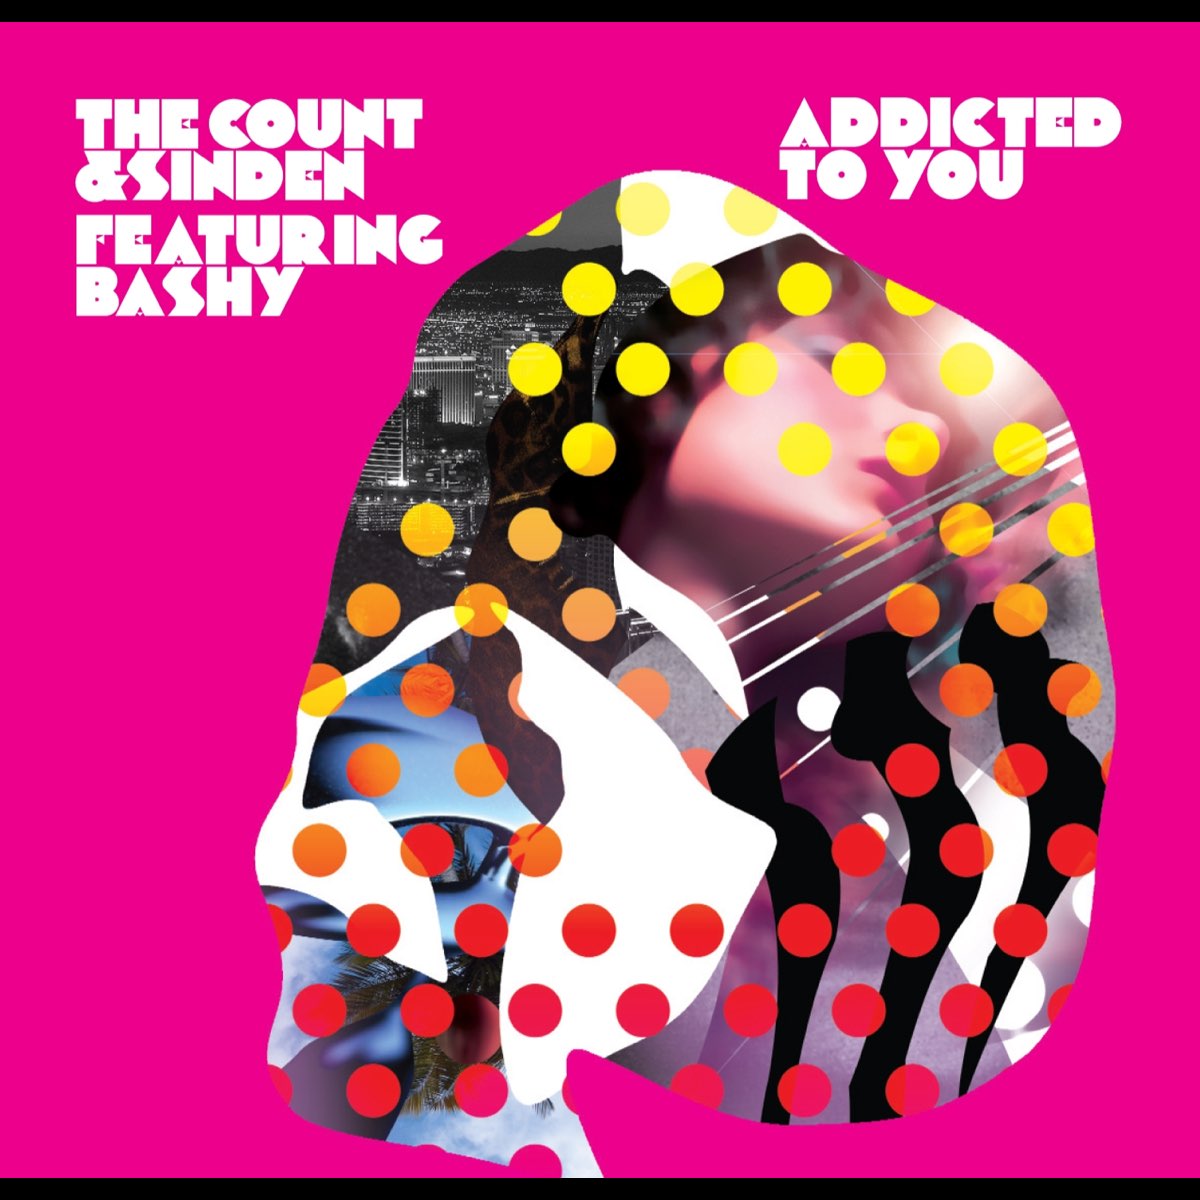 Addicted to you. Addicted to you одежда. Album Art addicted to you. Addicted to you Krista Ritchie. Addicted feat